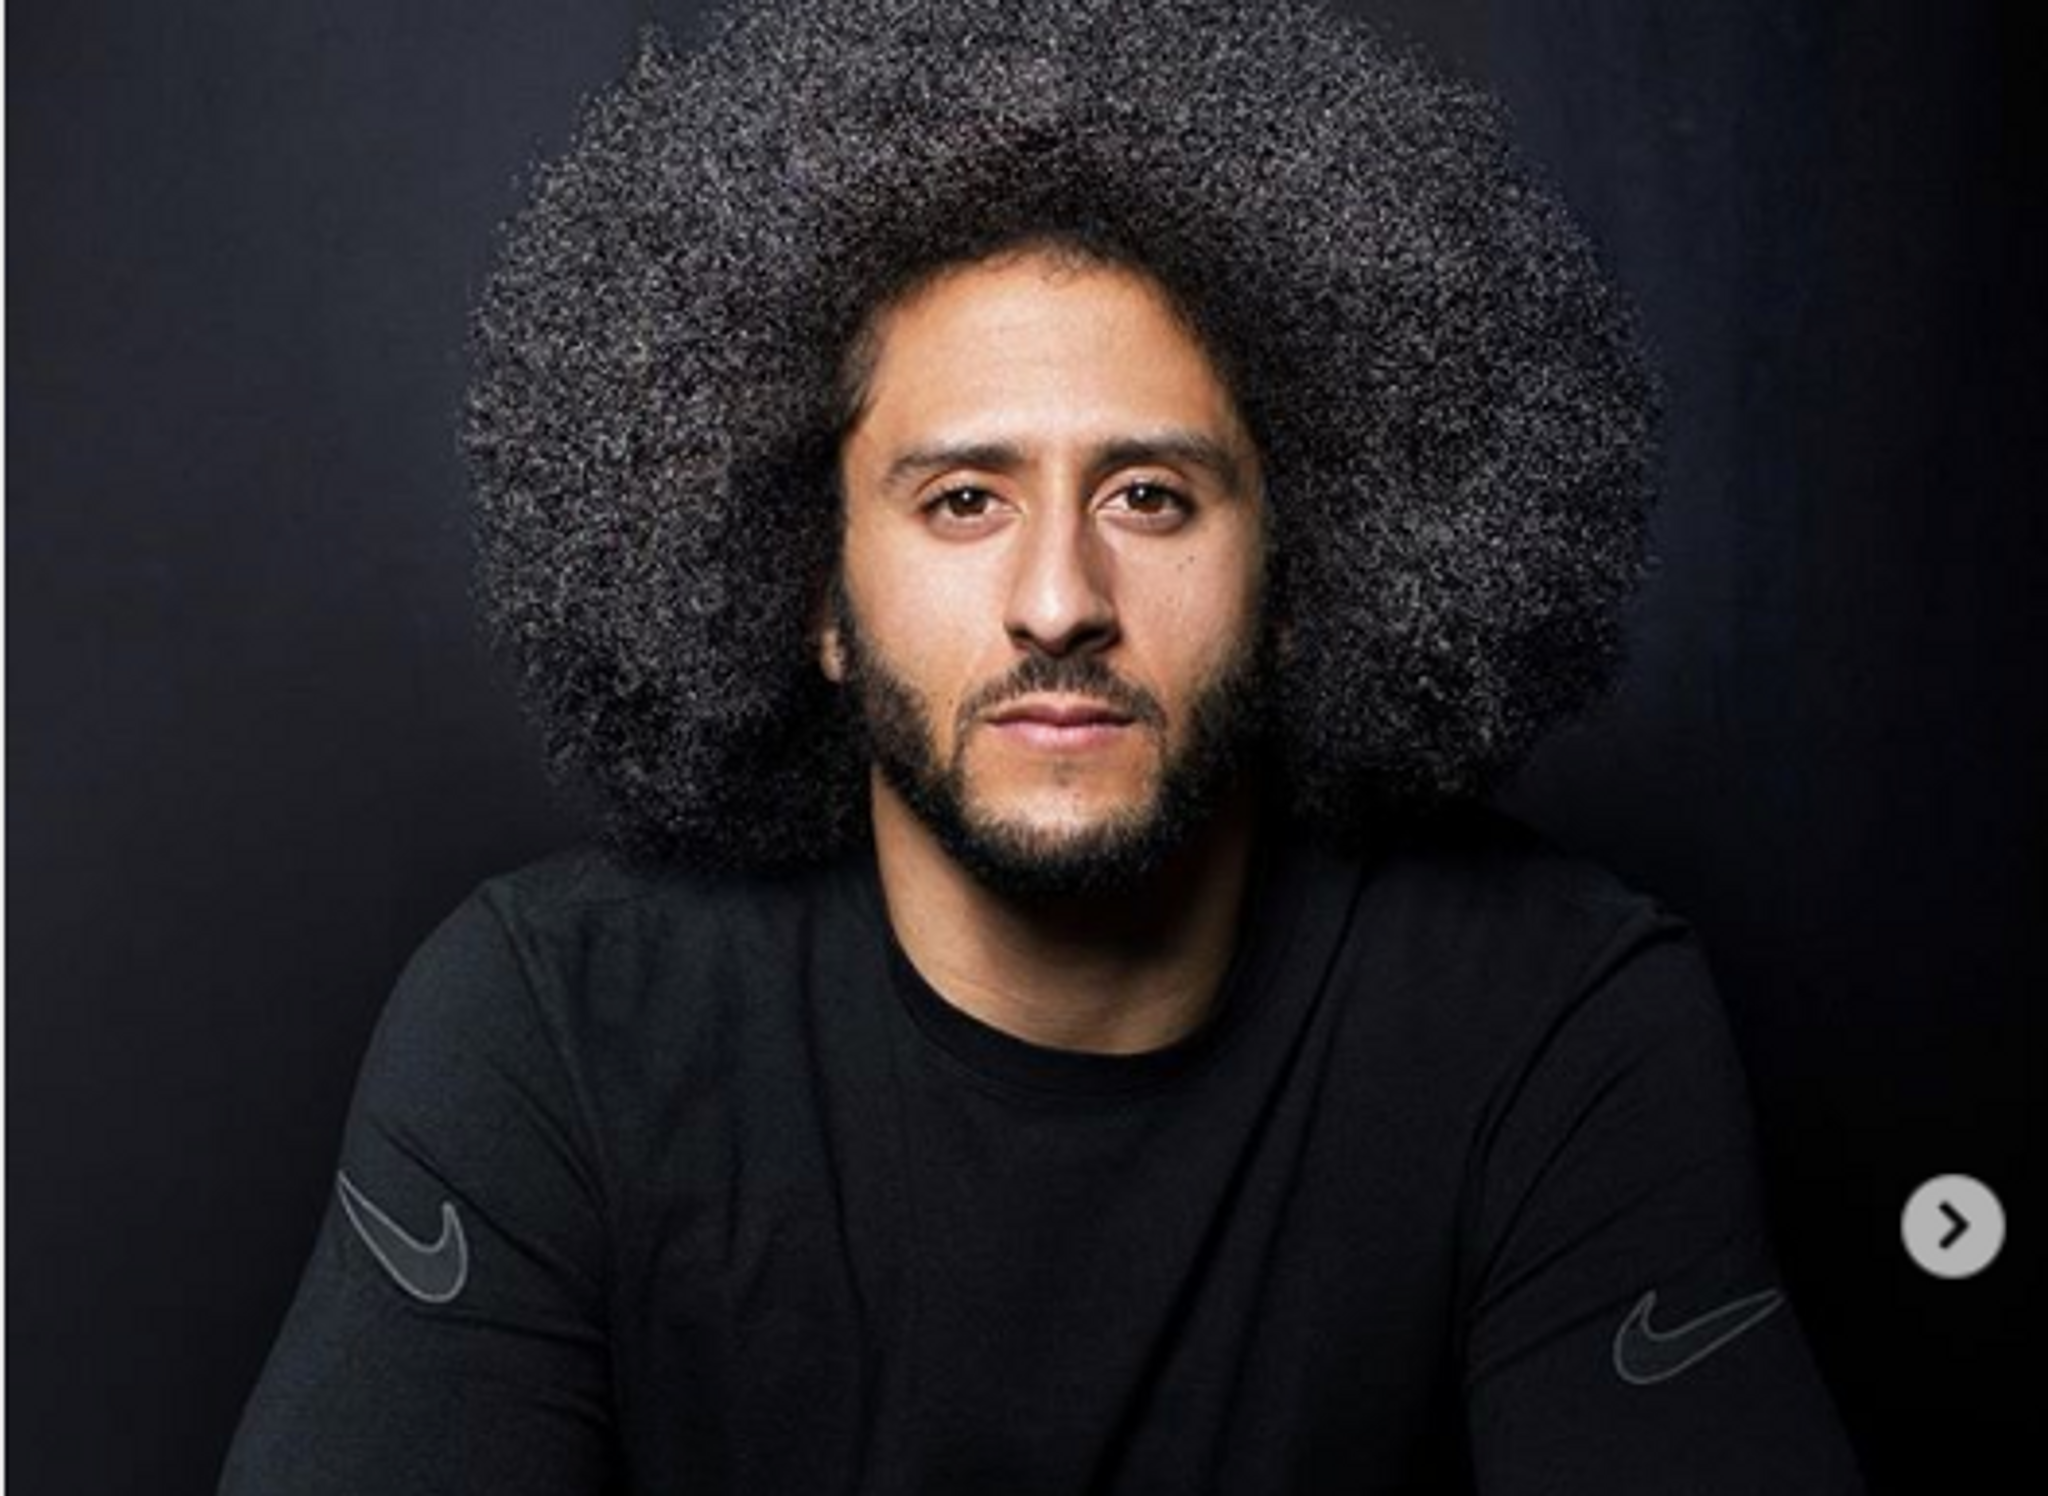 Nike’s stock rose when it took a stand for values